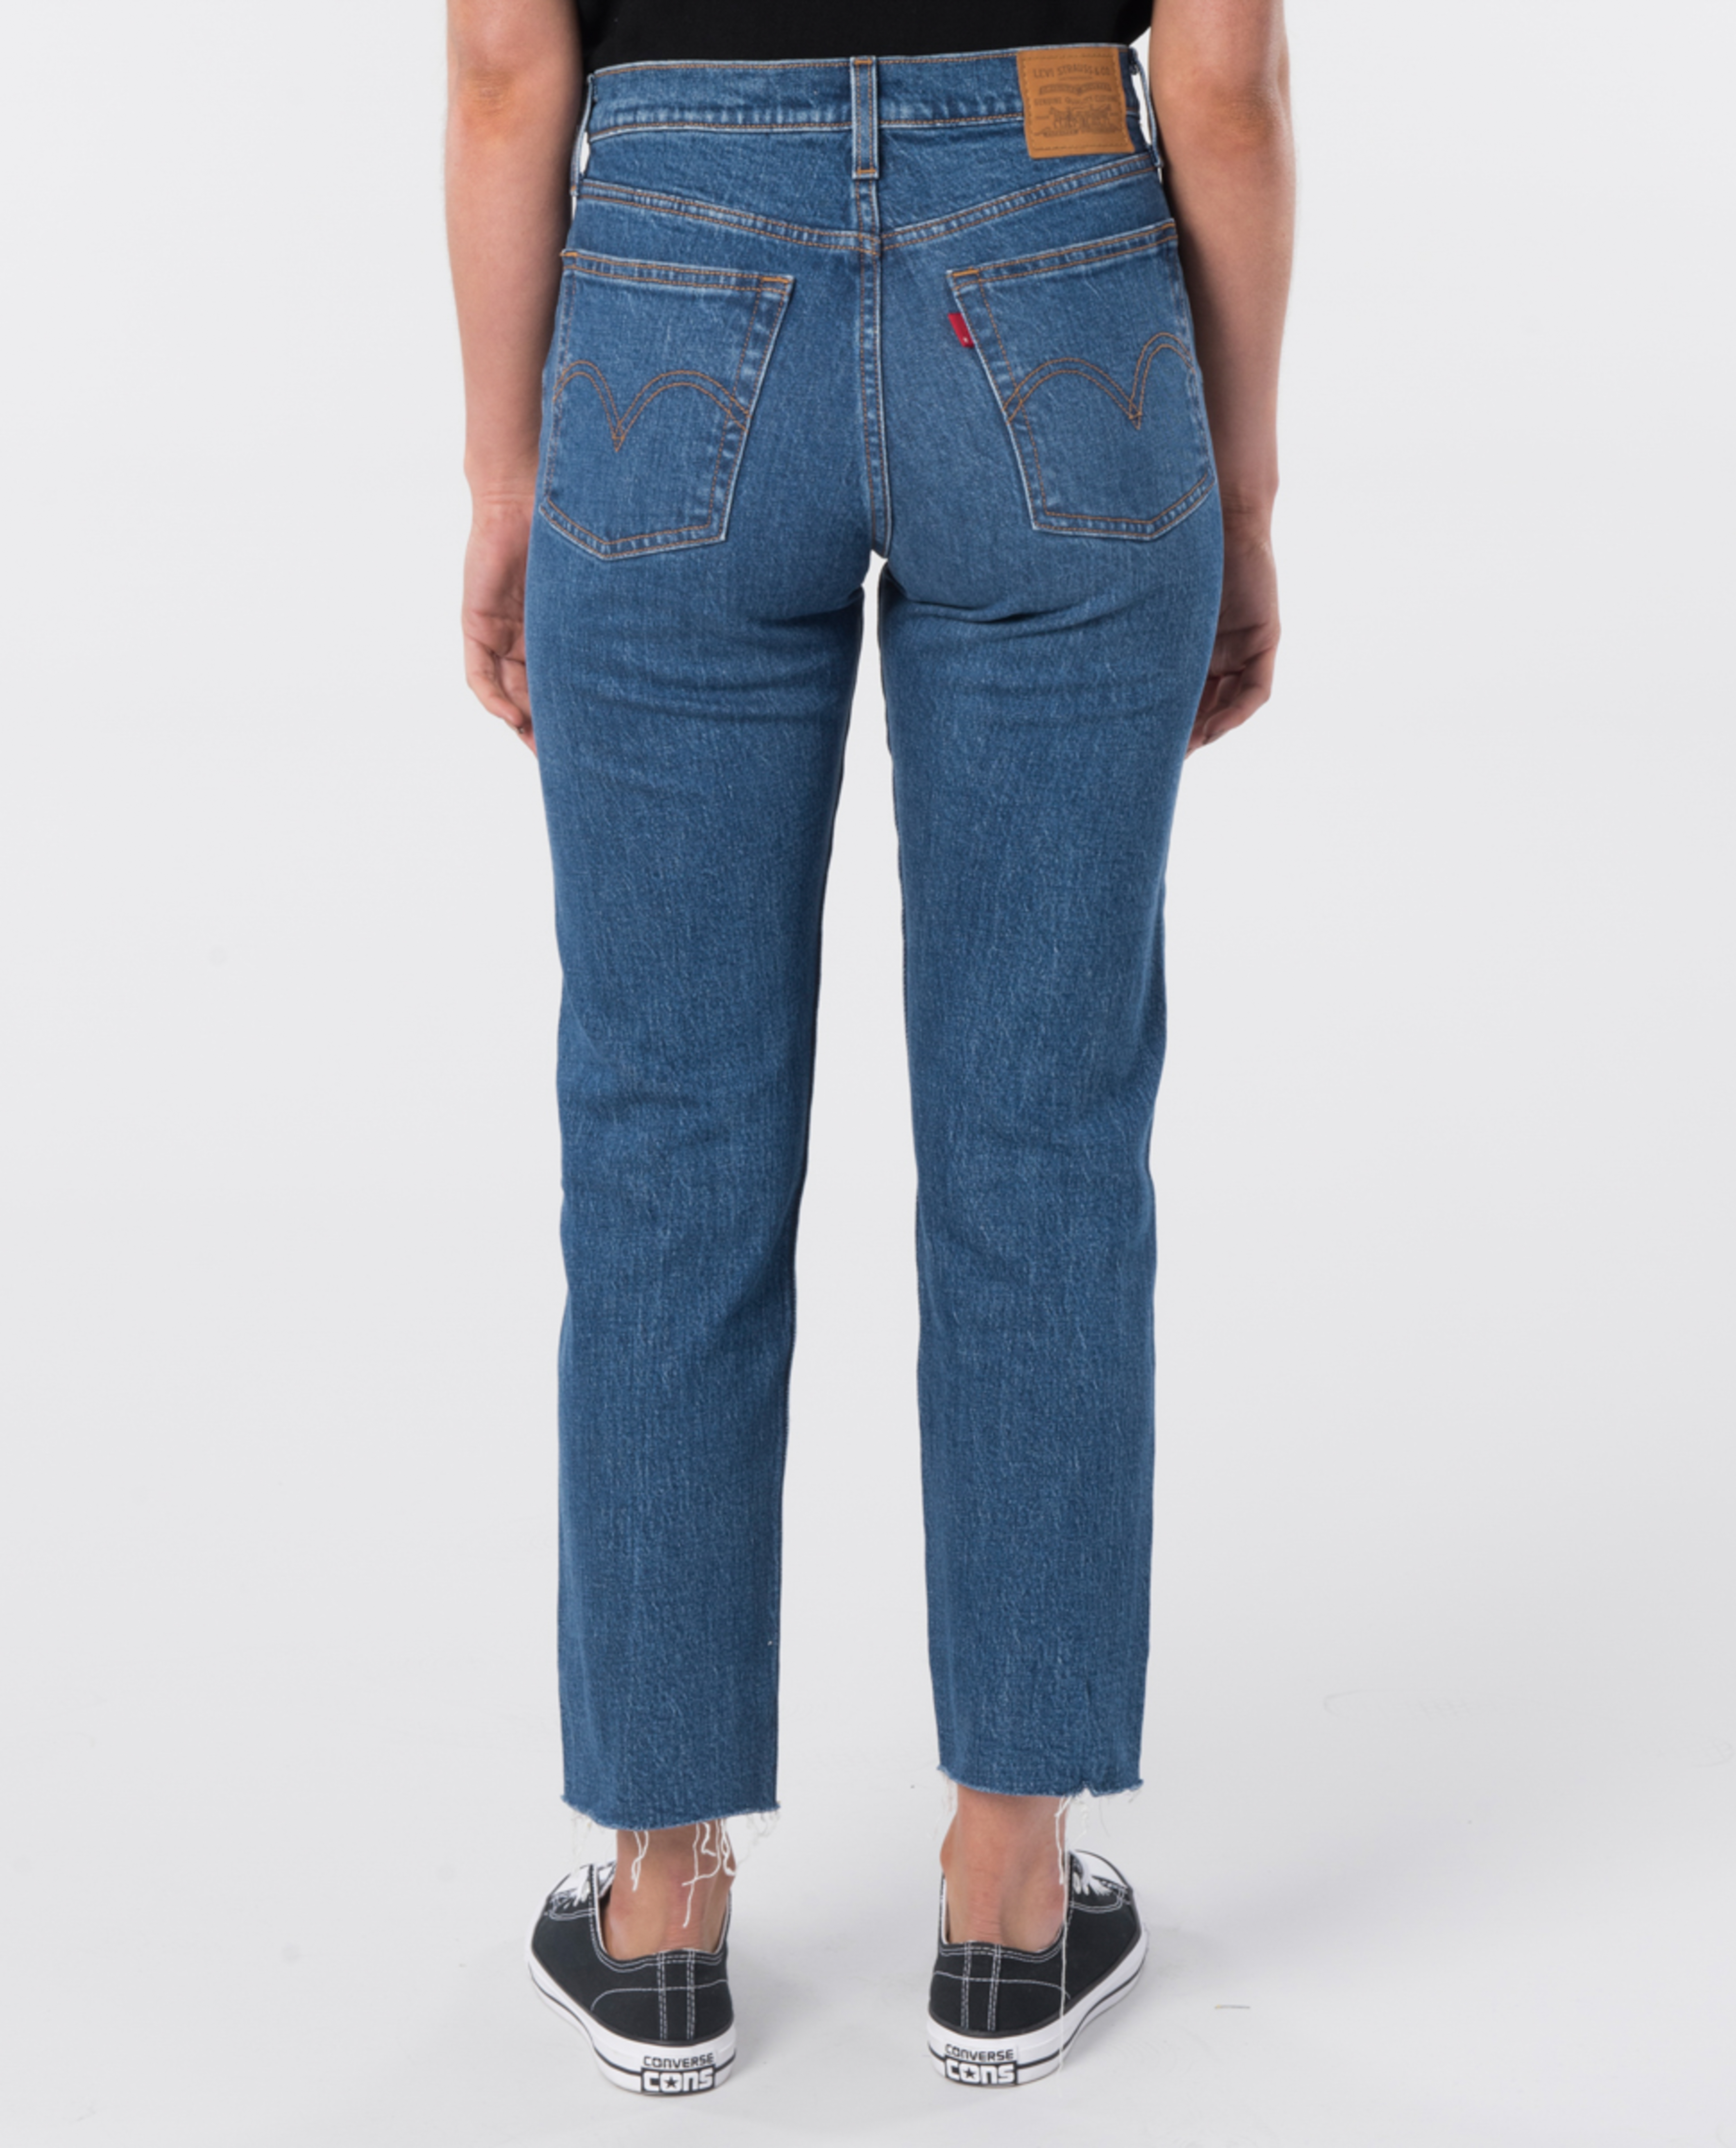 Levis Wedgie Straight Jean Ozmosis Jeans